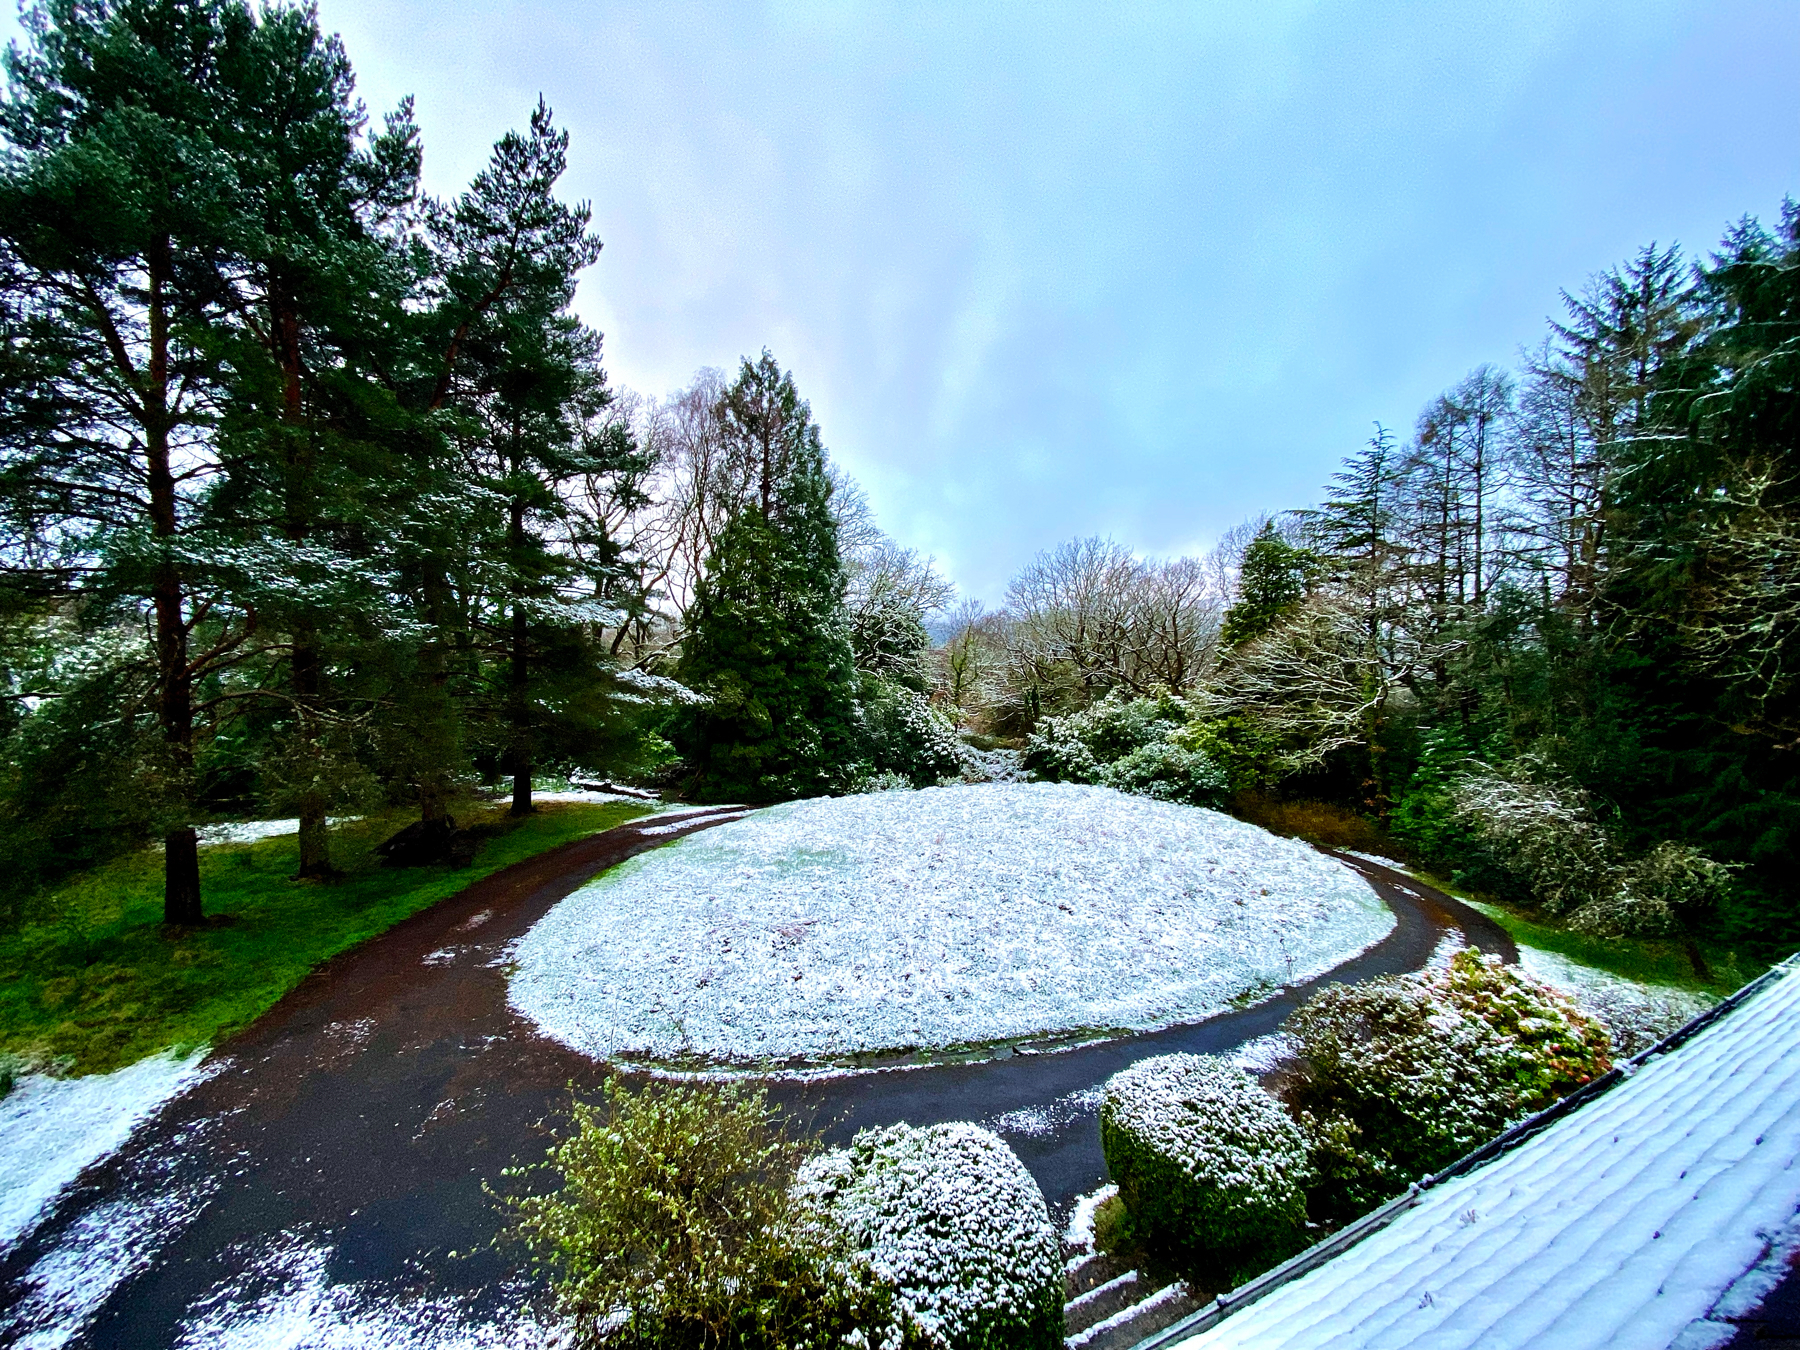 A snowy garden with a winding driveway amongst trees and bushes, a dusting of snow on the ground and rooftops, under a partly cloudy sky.